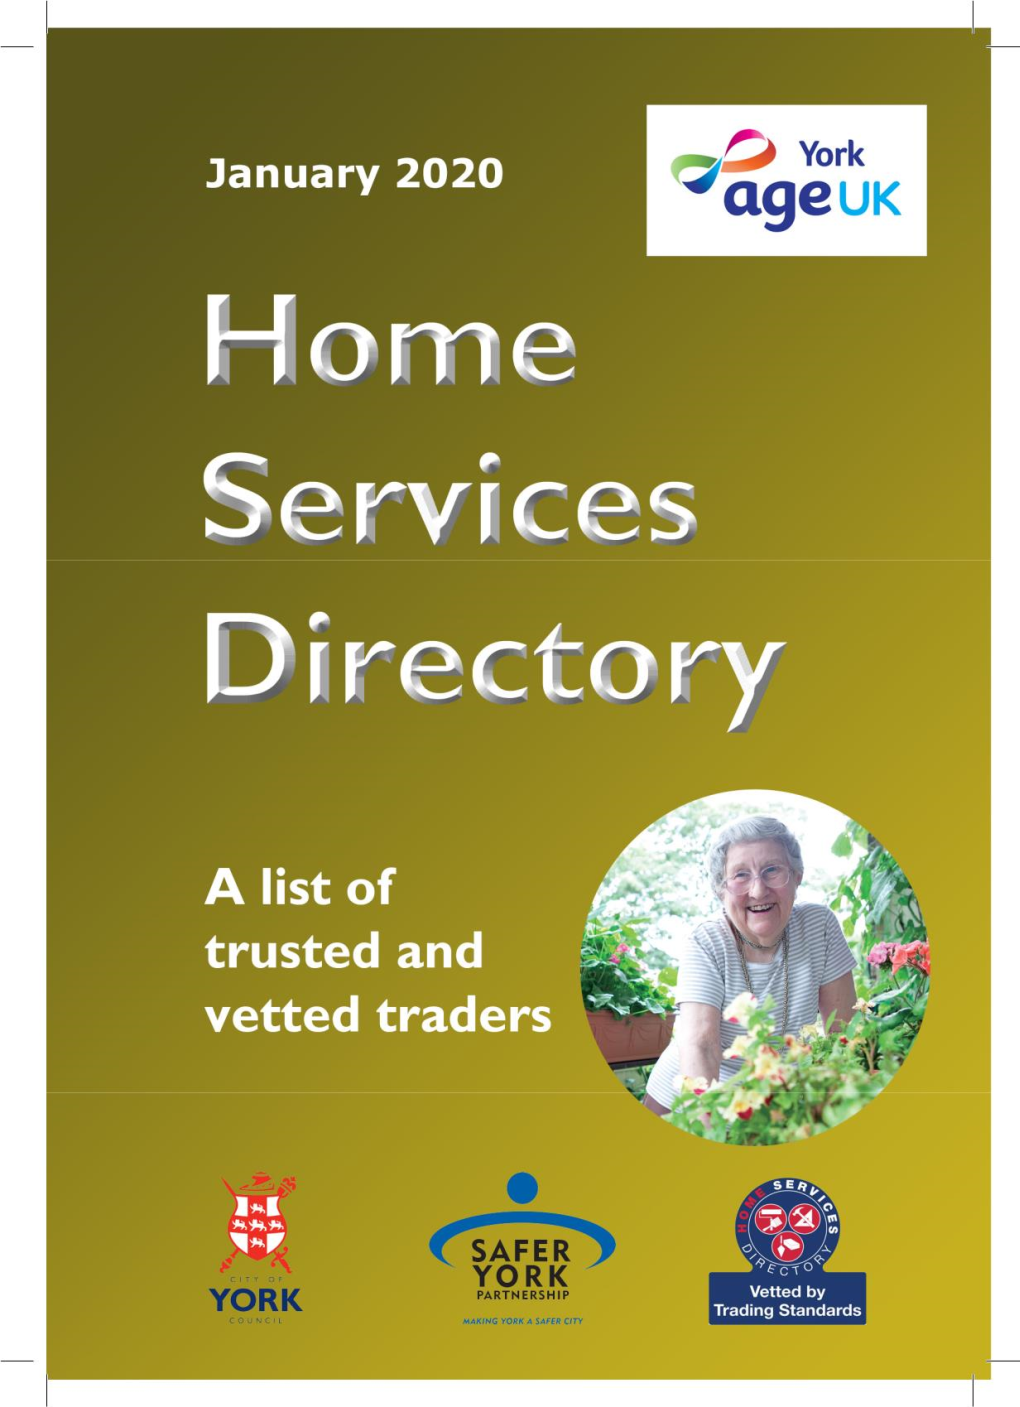 Click on This Link to Download the Home Services Directory